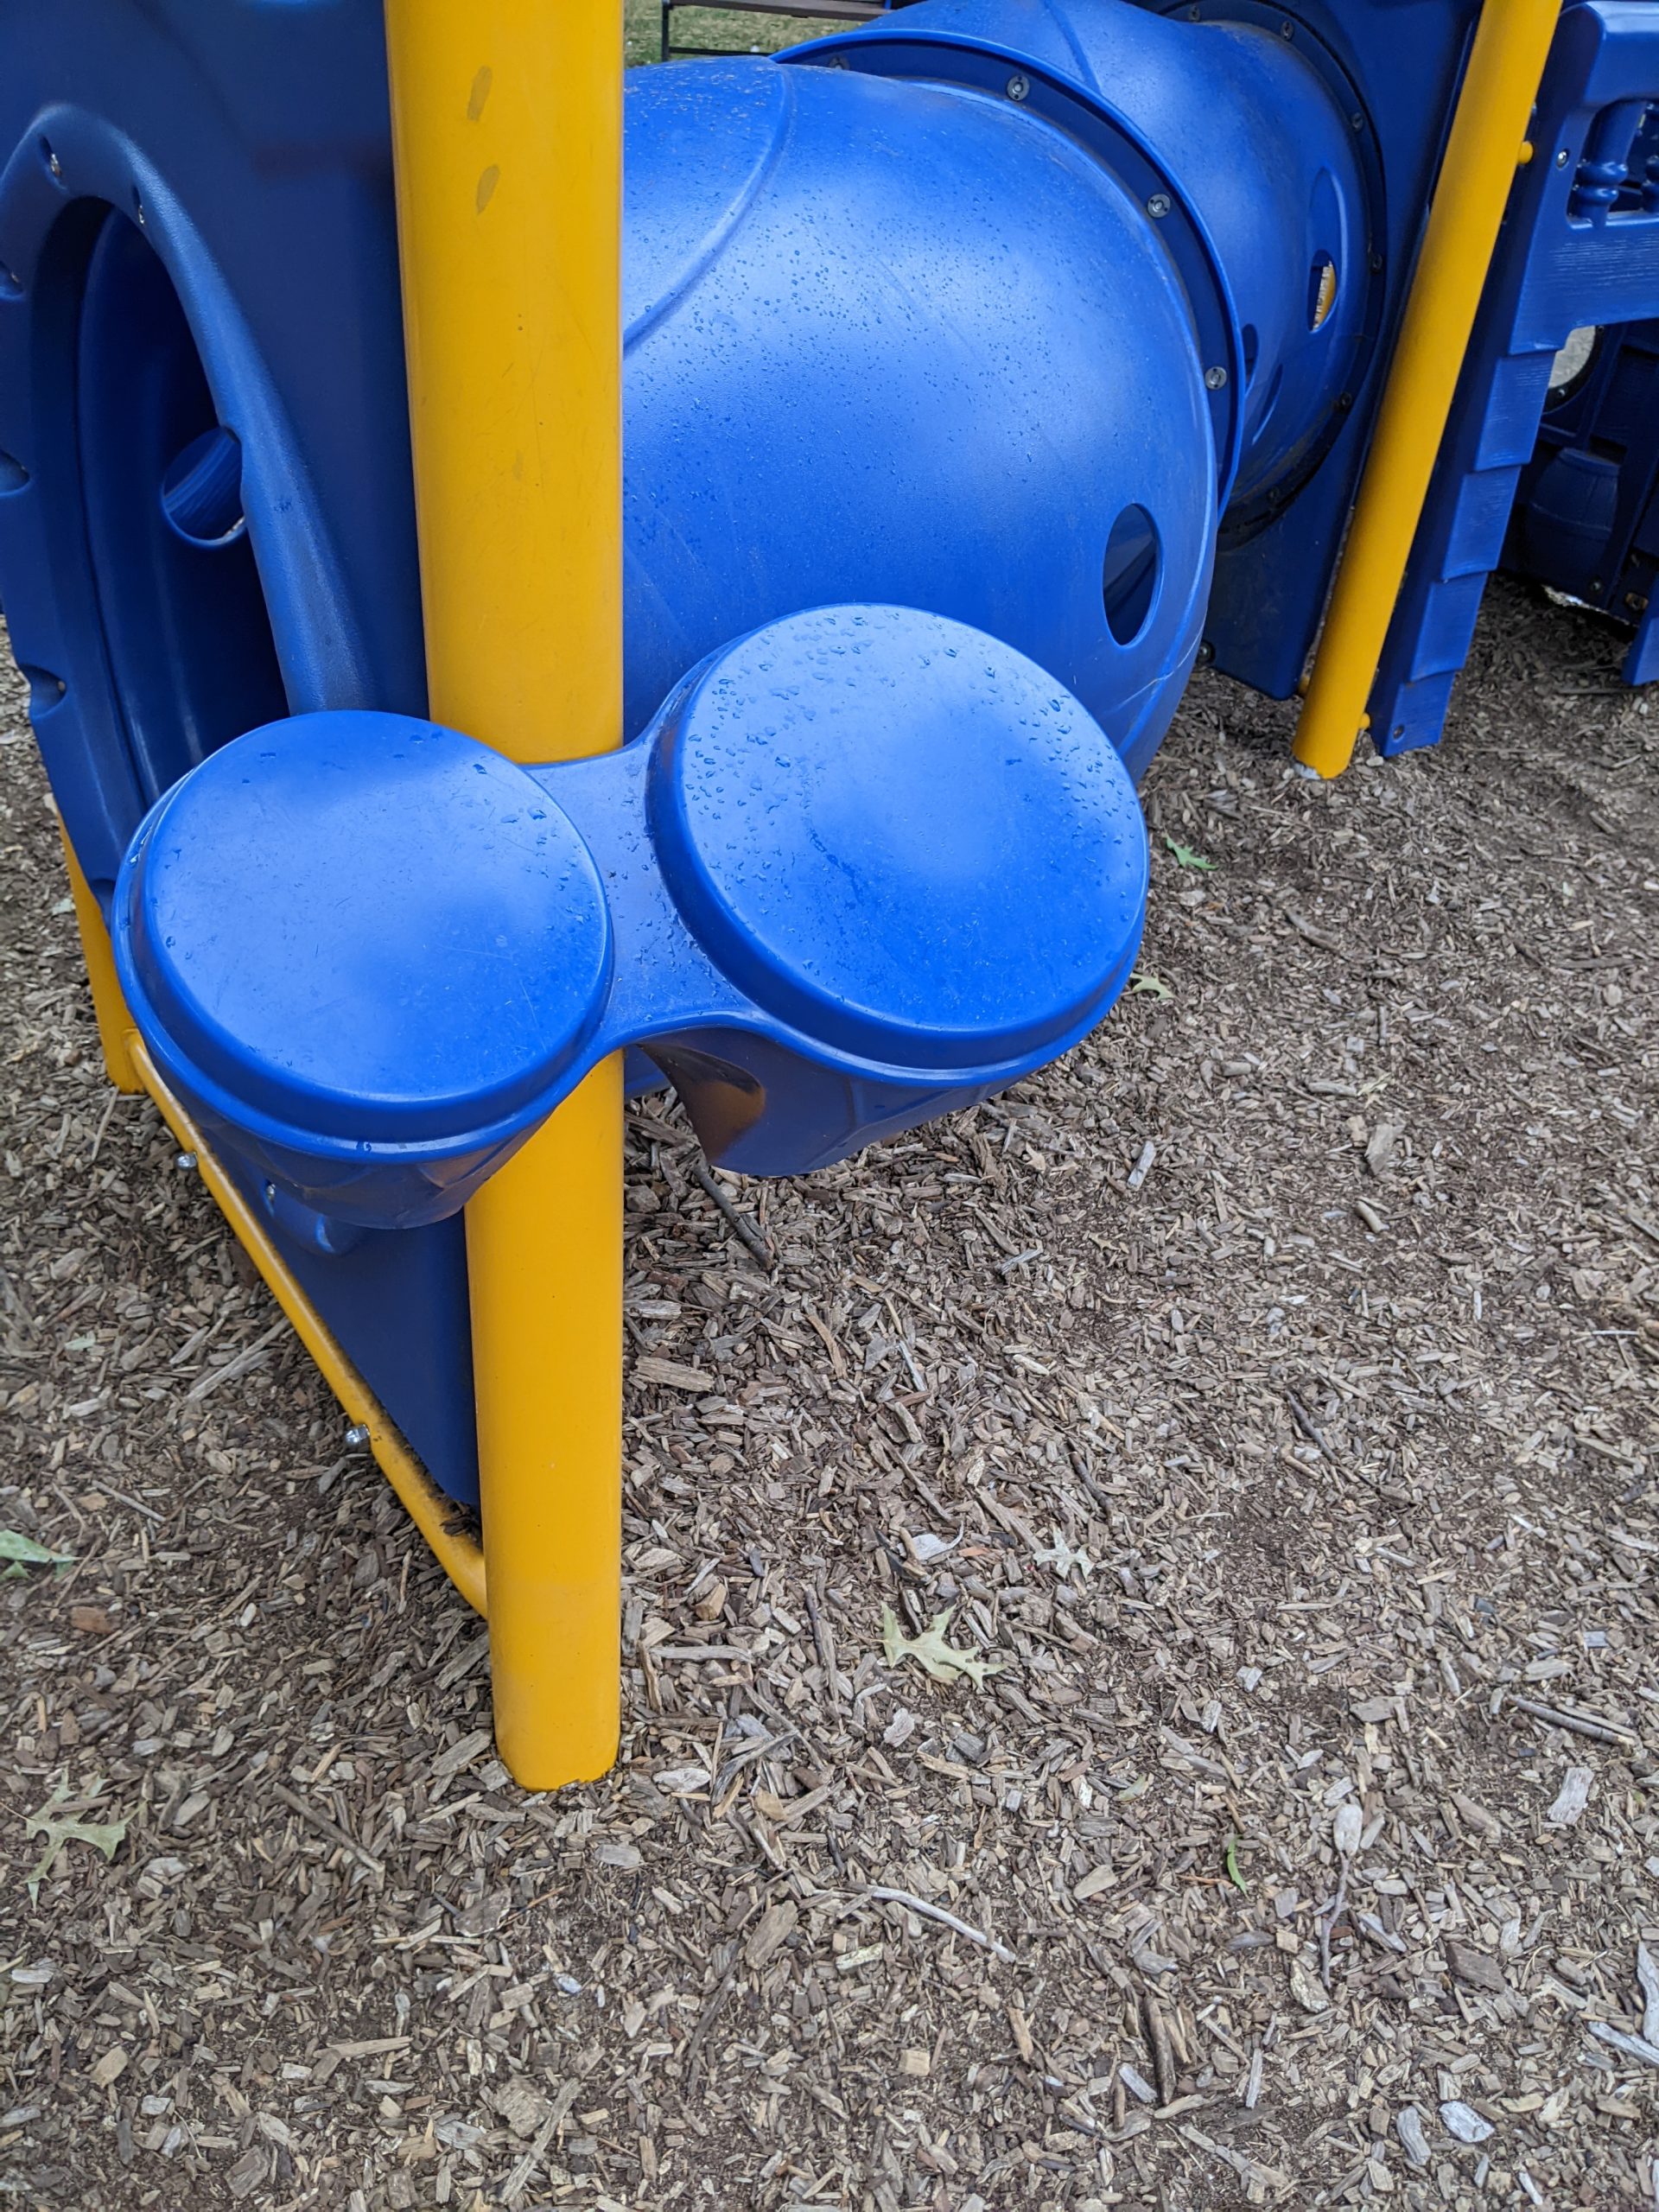 Playground with long tunnel - Accessible drums At Red Bank Battlefield Park Playground in National Park NJ